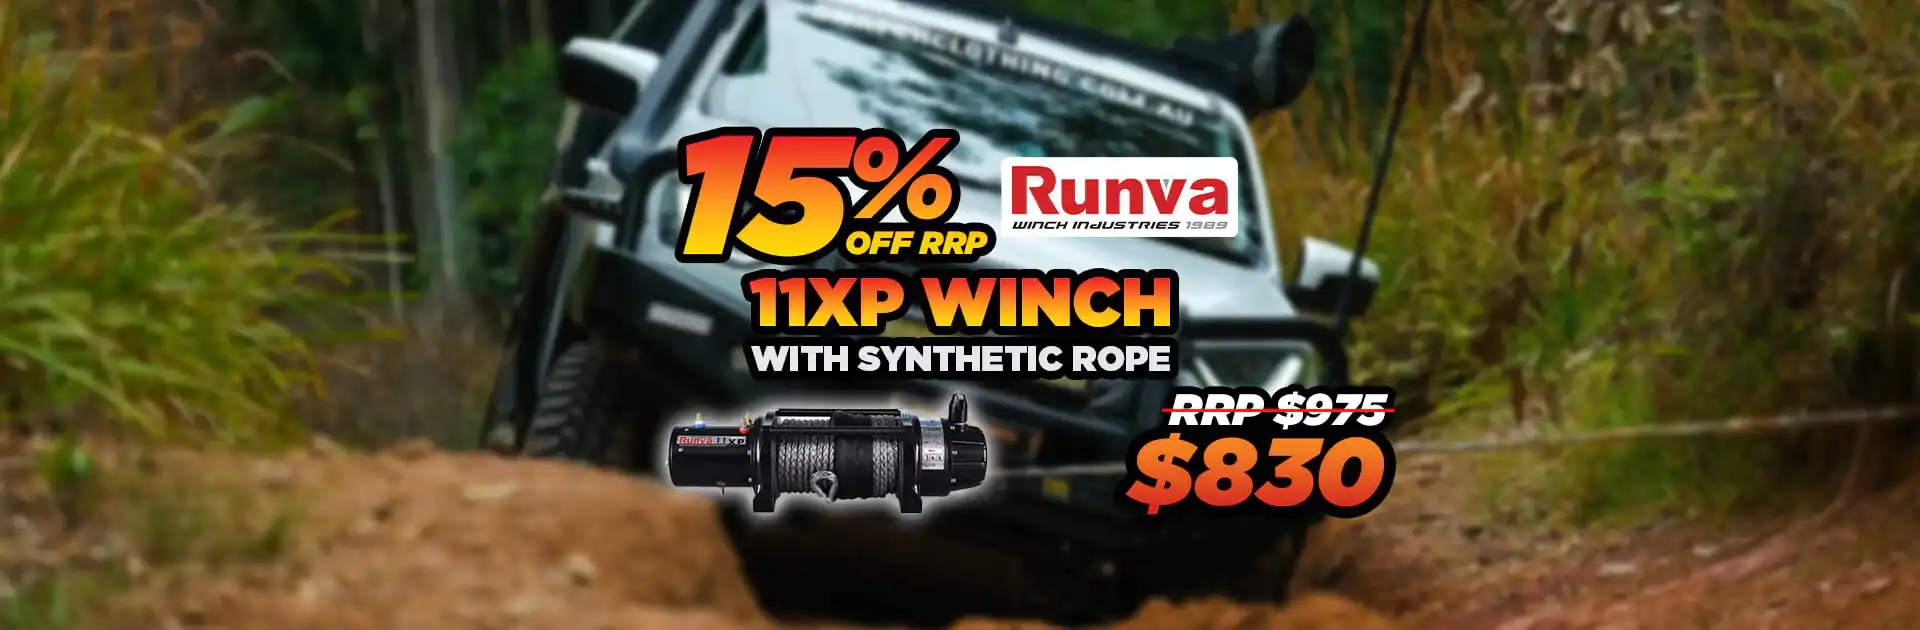 15% OFF RRP 11XP Winch with Synthetic Rope now $830 at 4WD 24/7